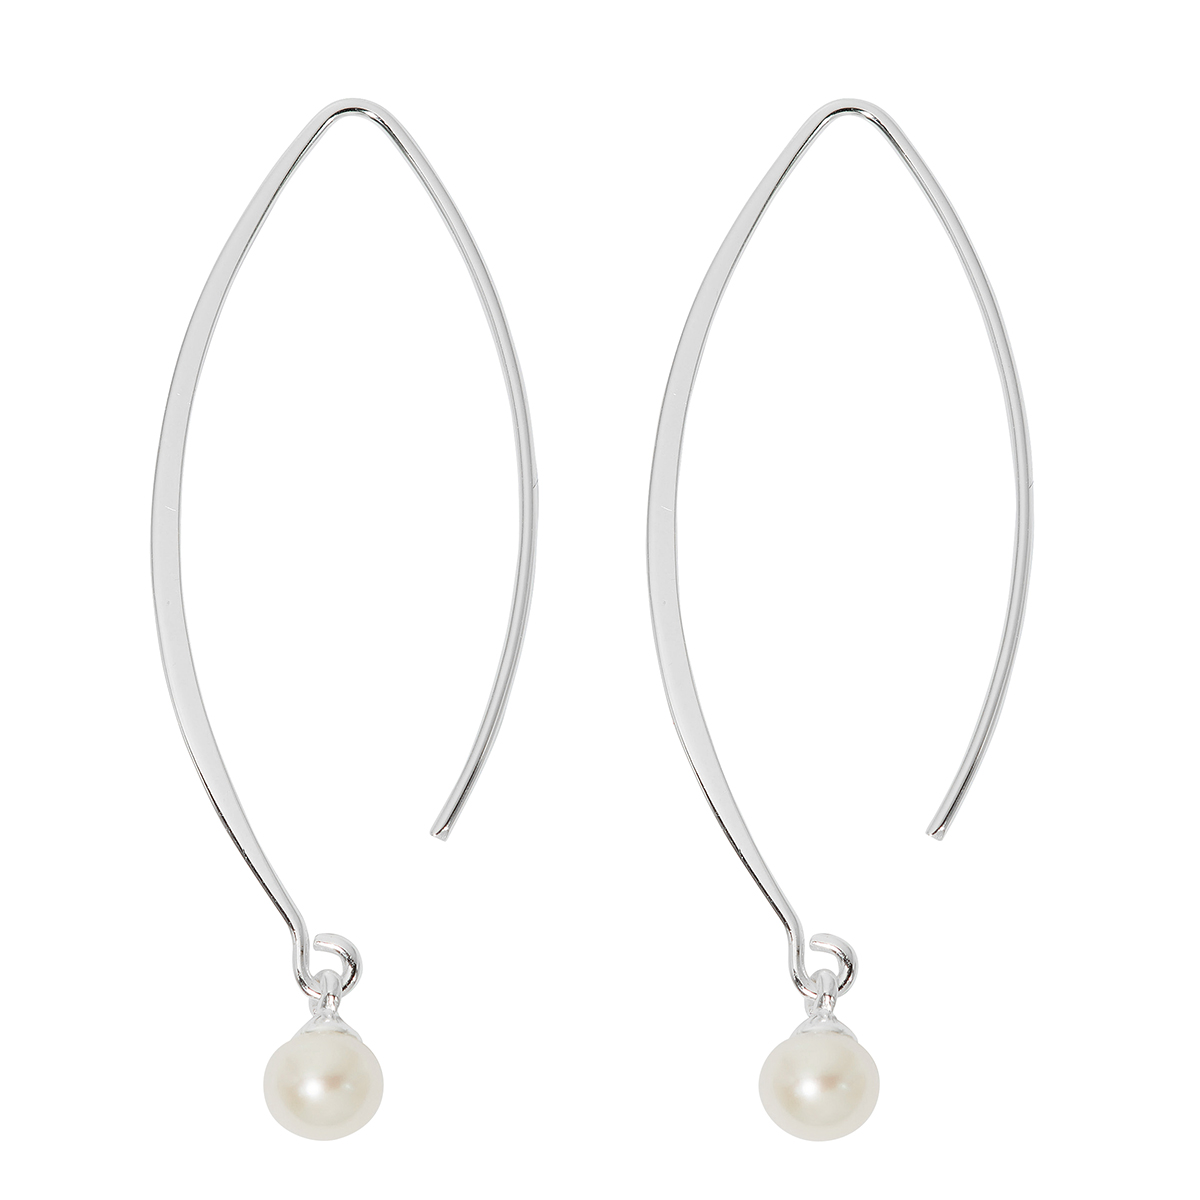 Danecraft Silver Plated 5mm Pearl Threader Earrings